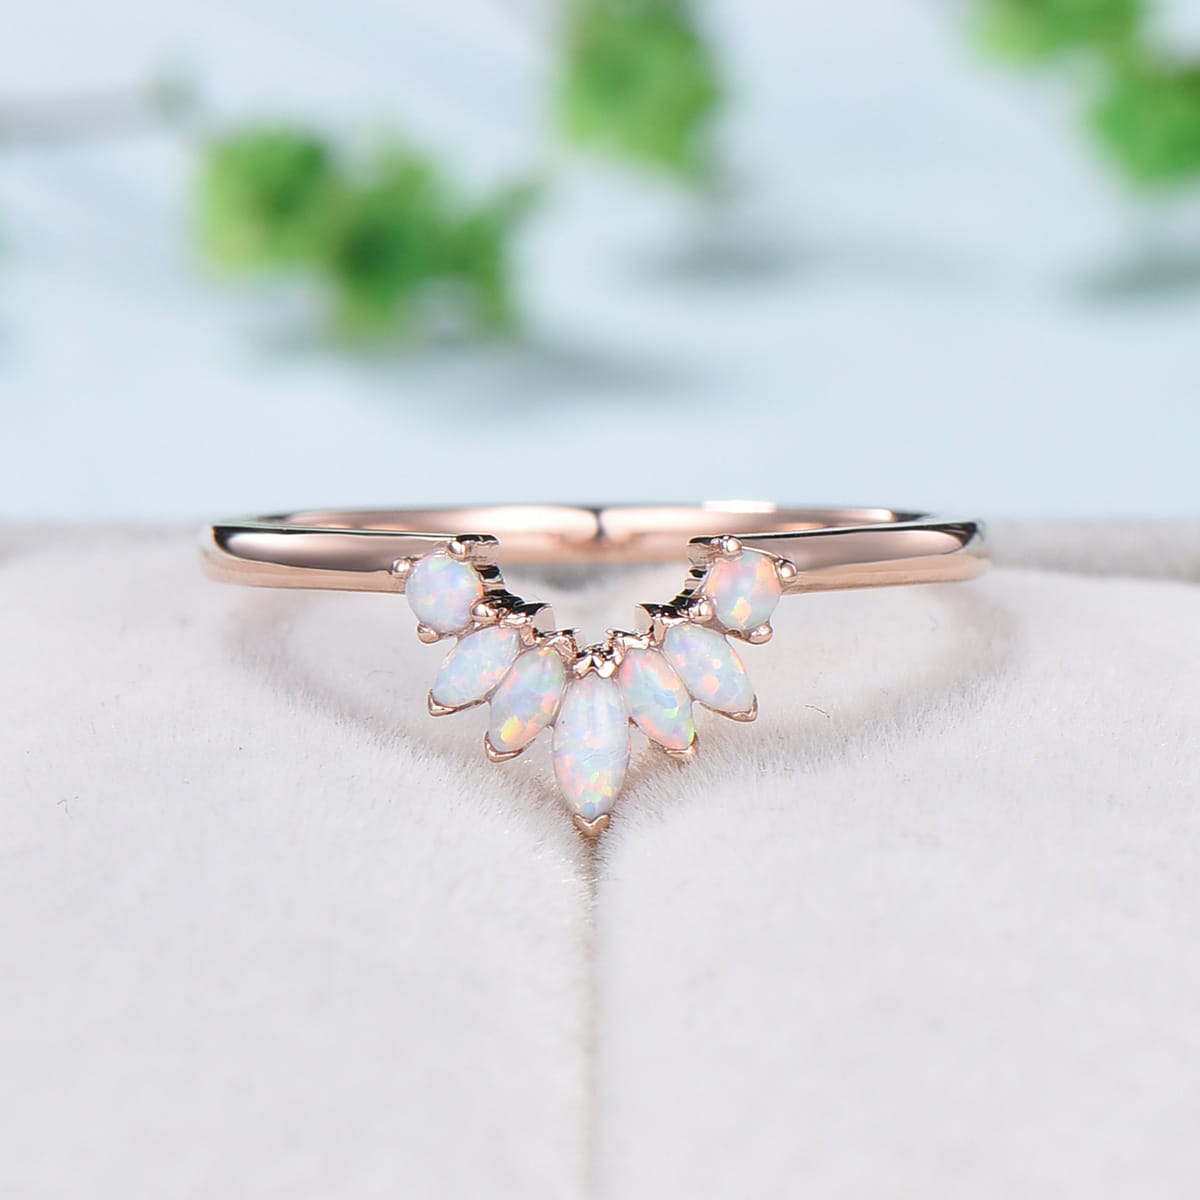 Vintage White Opal Wedding Ring Curved V Marquise Cut Fire Opal Wedding Band For Women Rose Gold Opal Stacking Art Deco Anniversary Ring - PENFINE